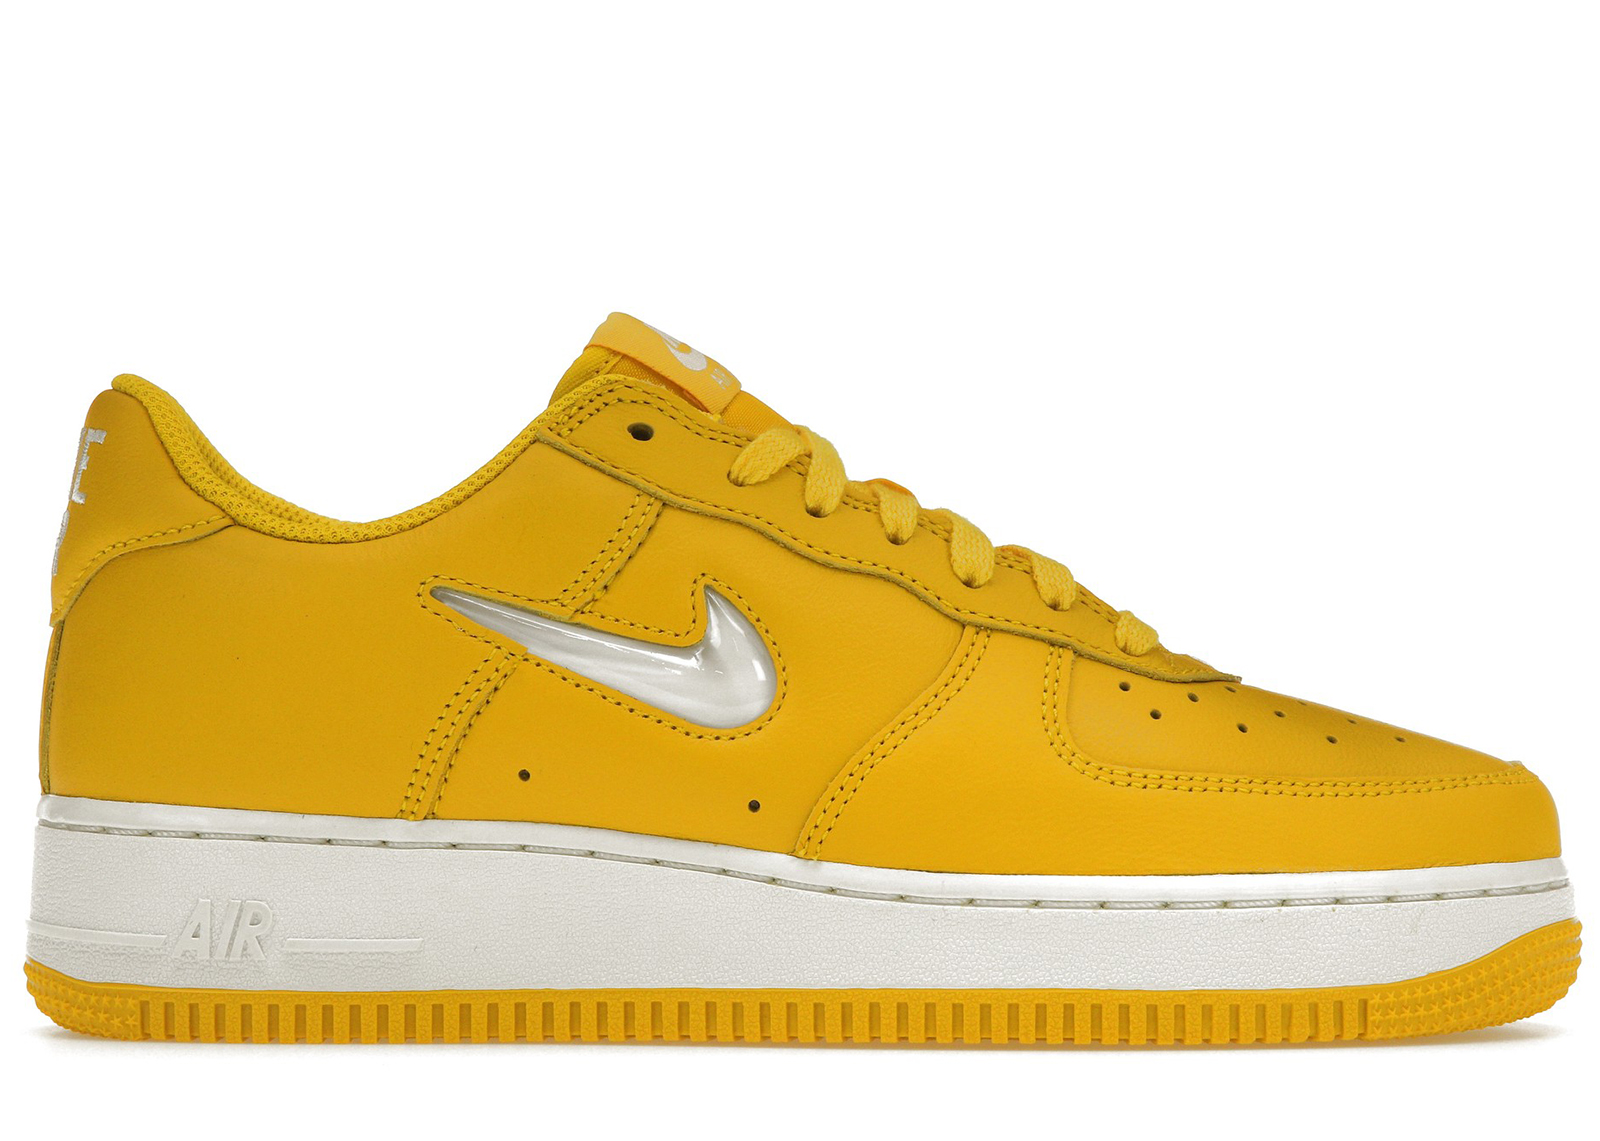 Nike Air Force 1 Low '07 Retro Color of the Month Orange Jewel 